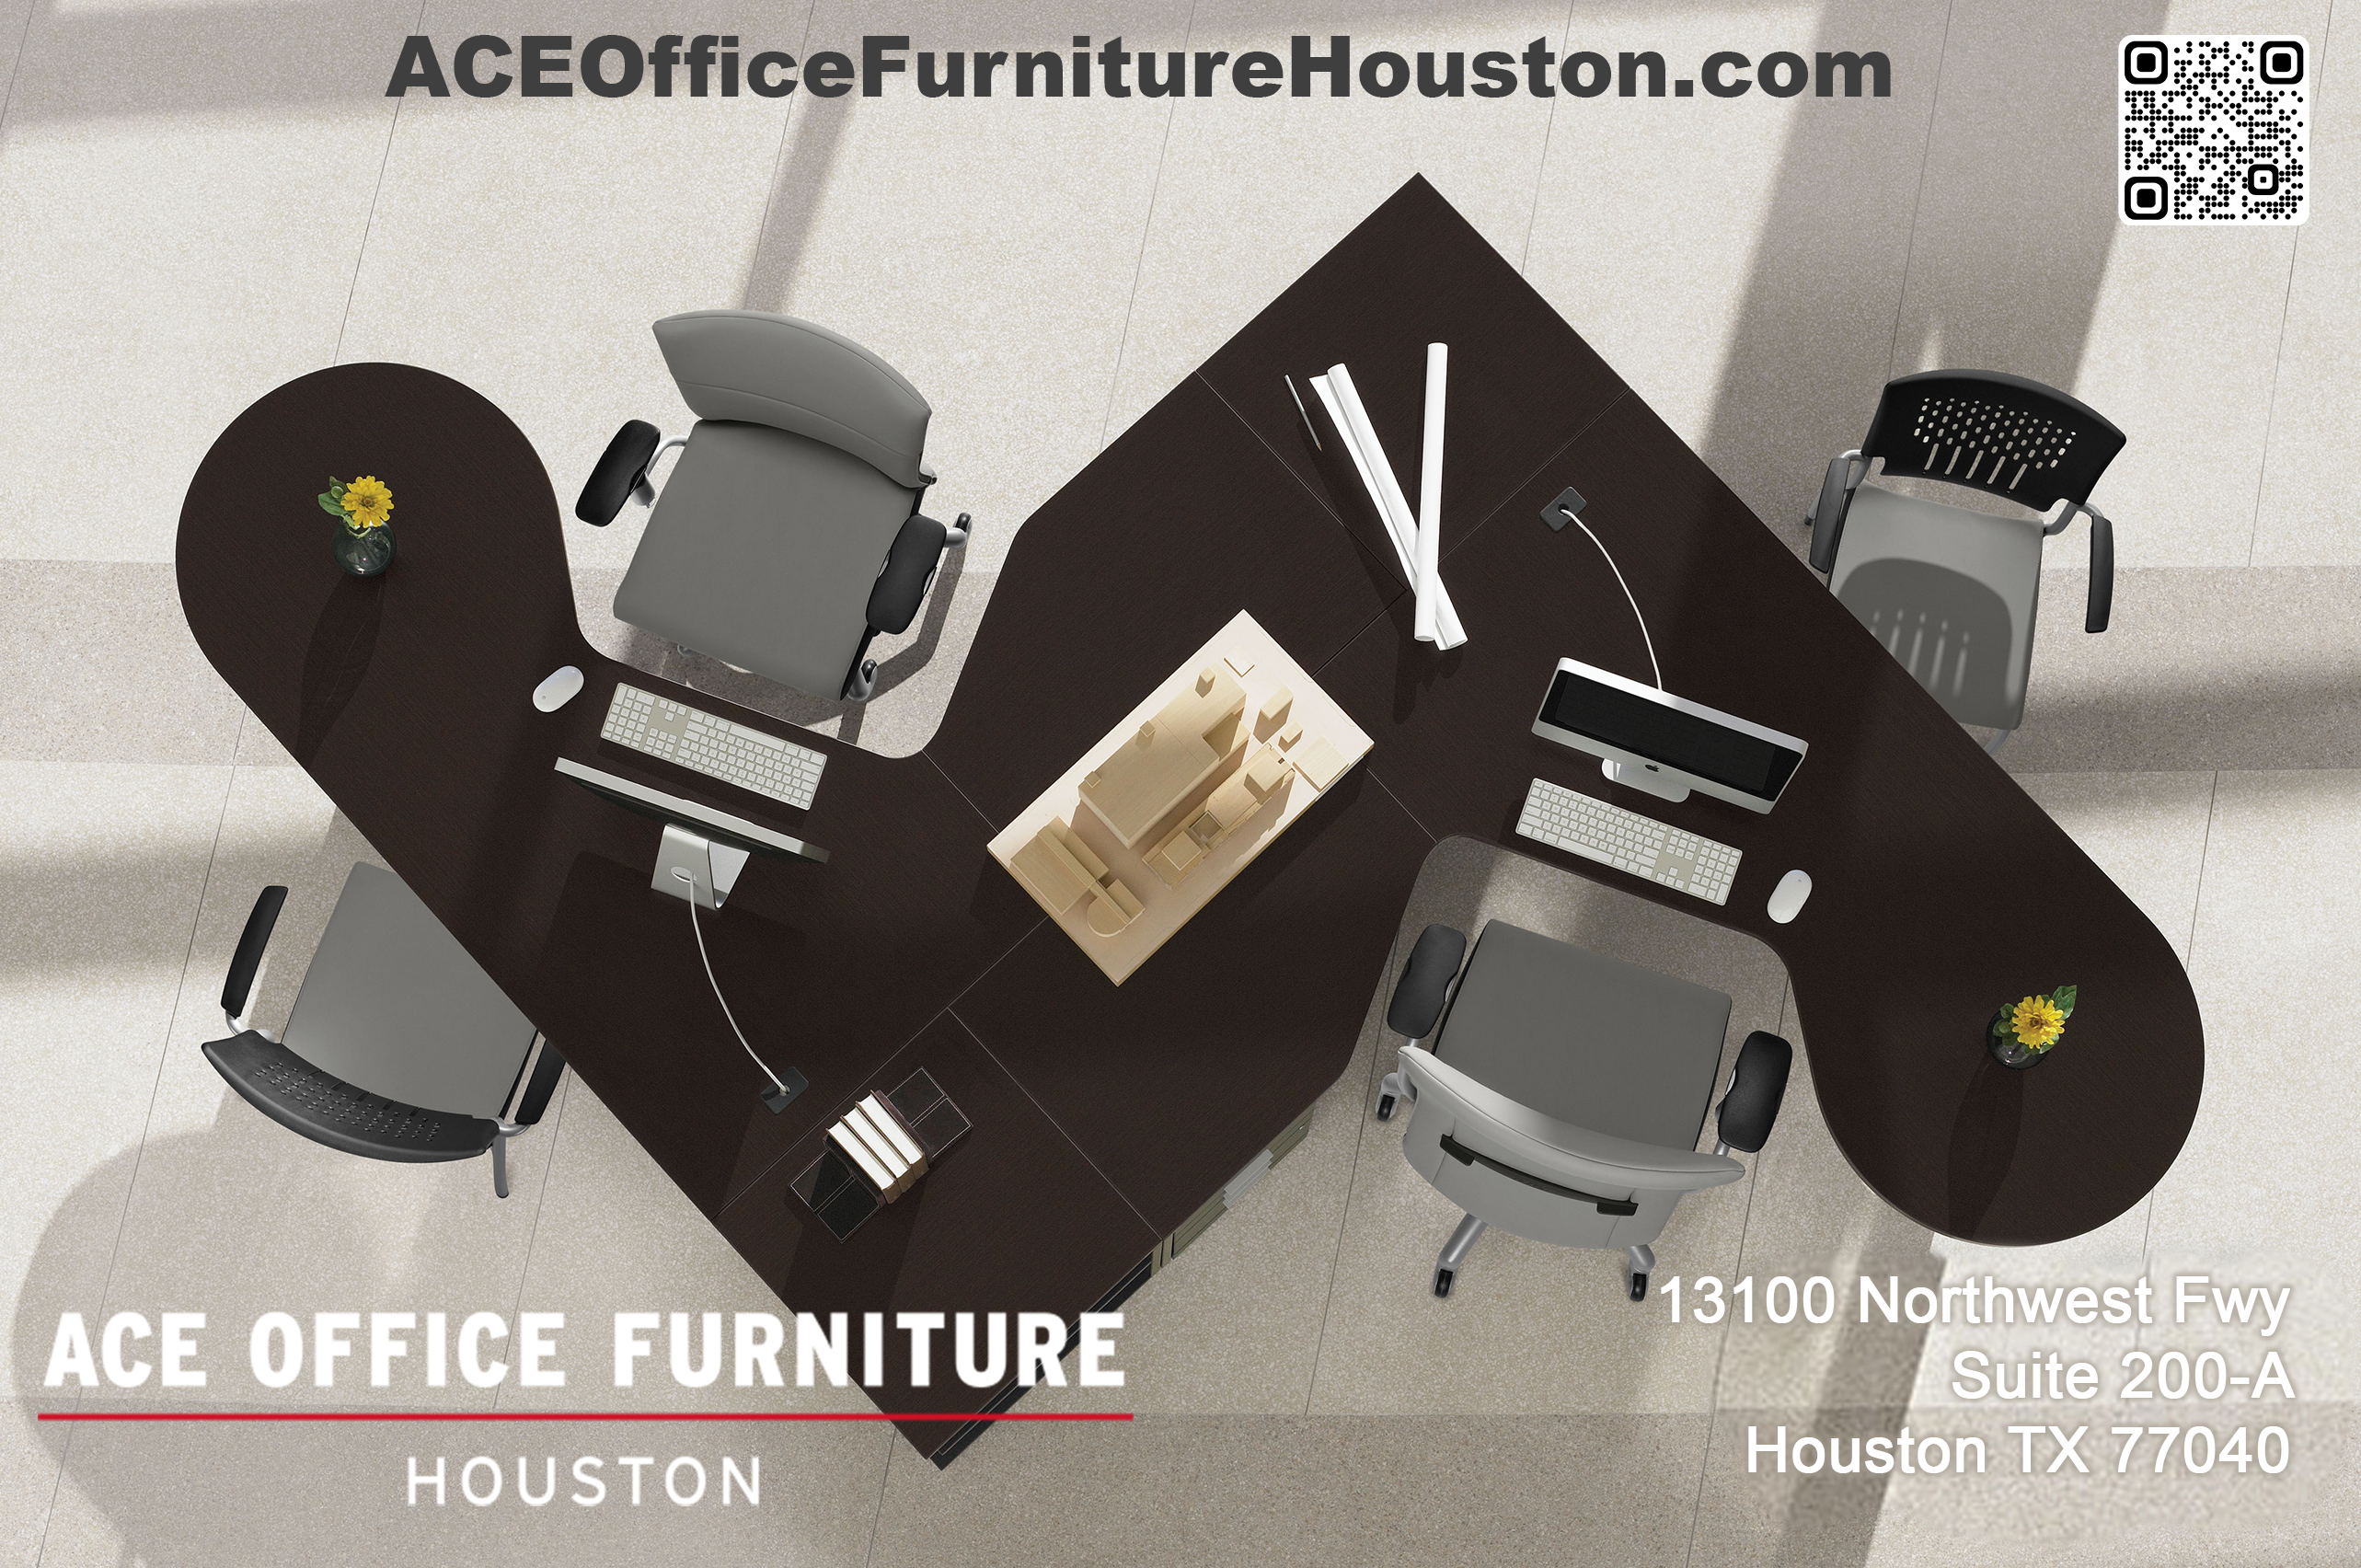 Ace Office Furniture Houston Prepares for 2023